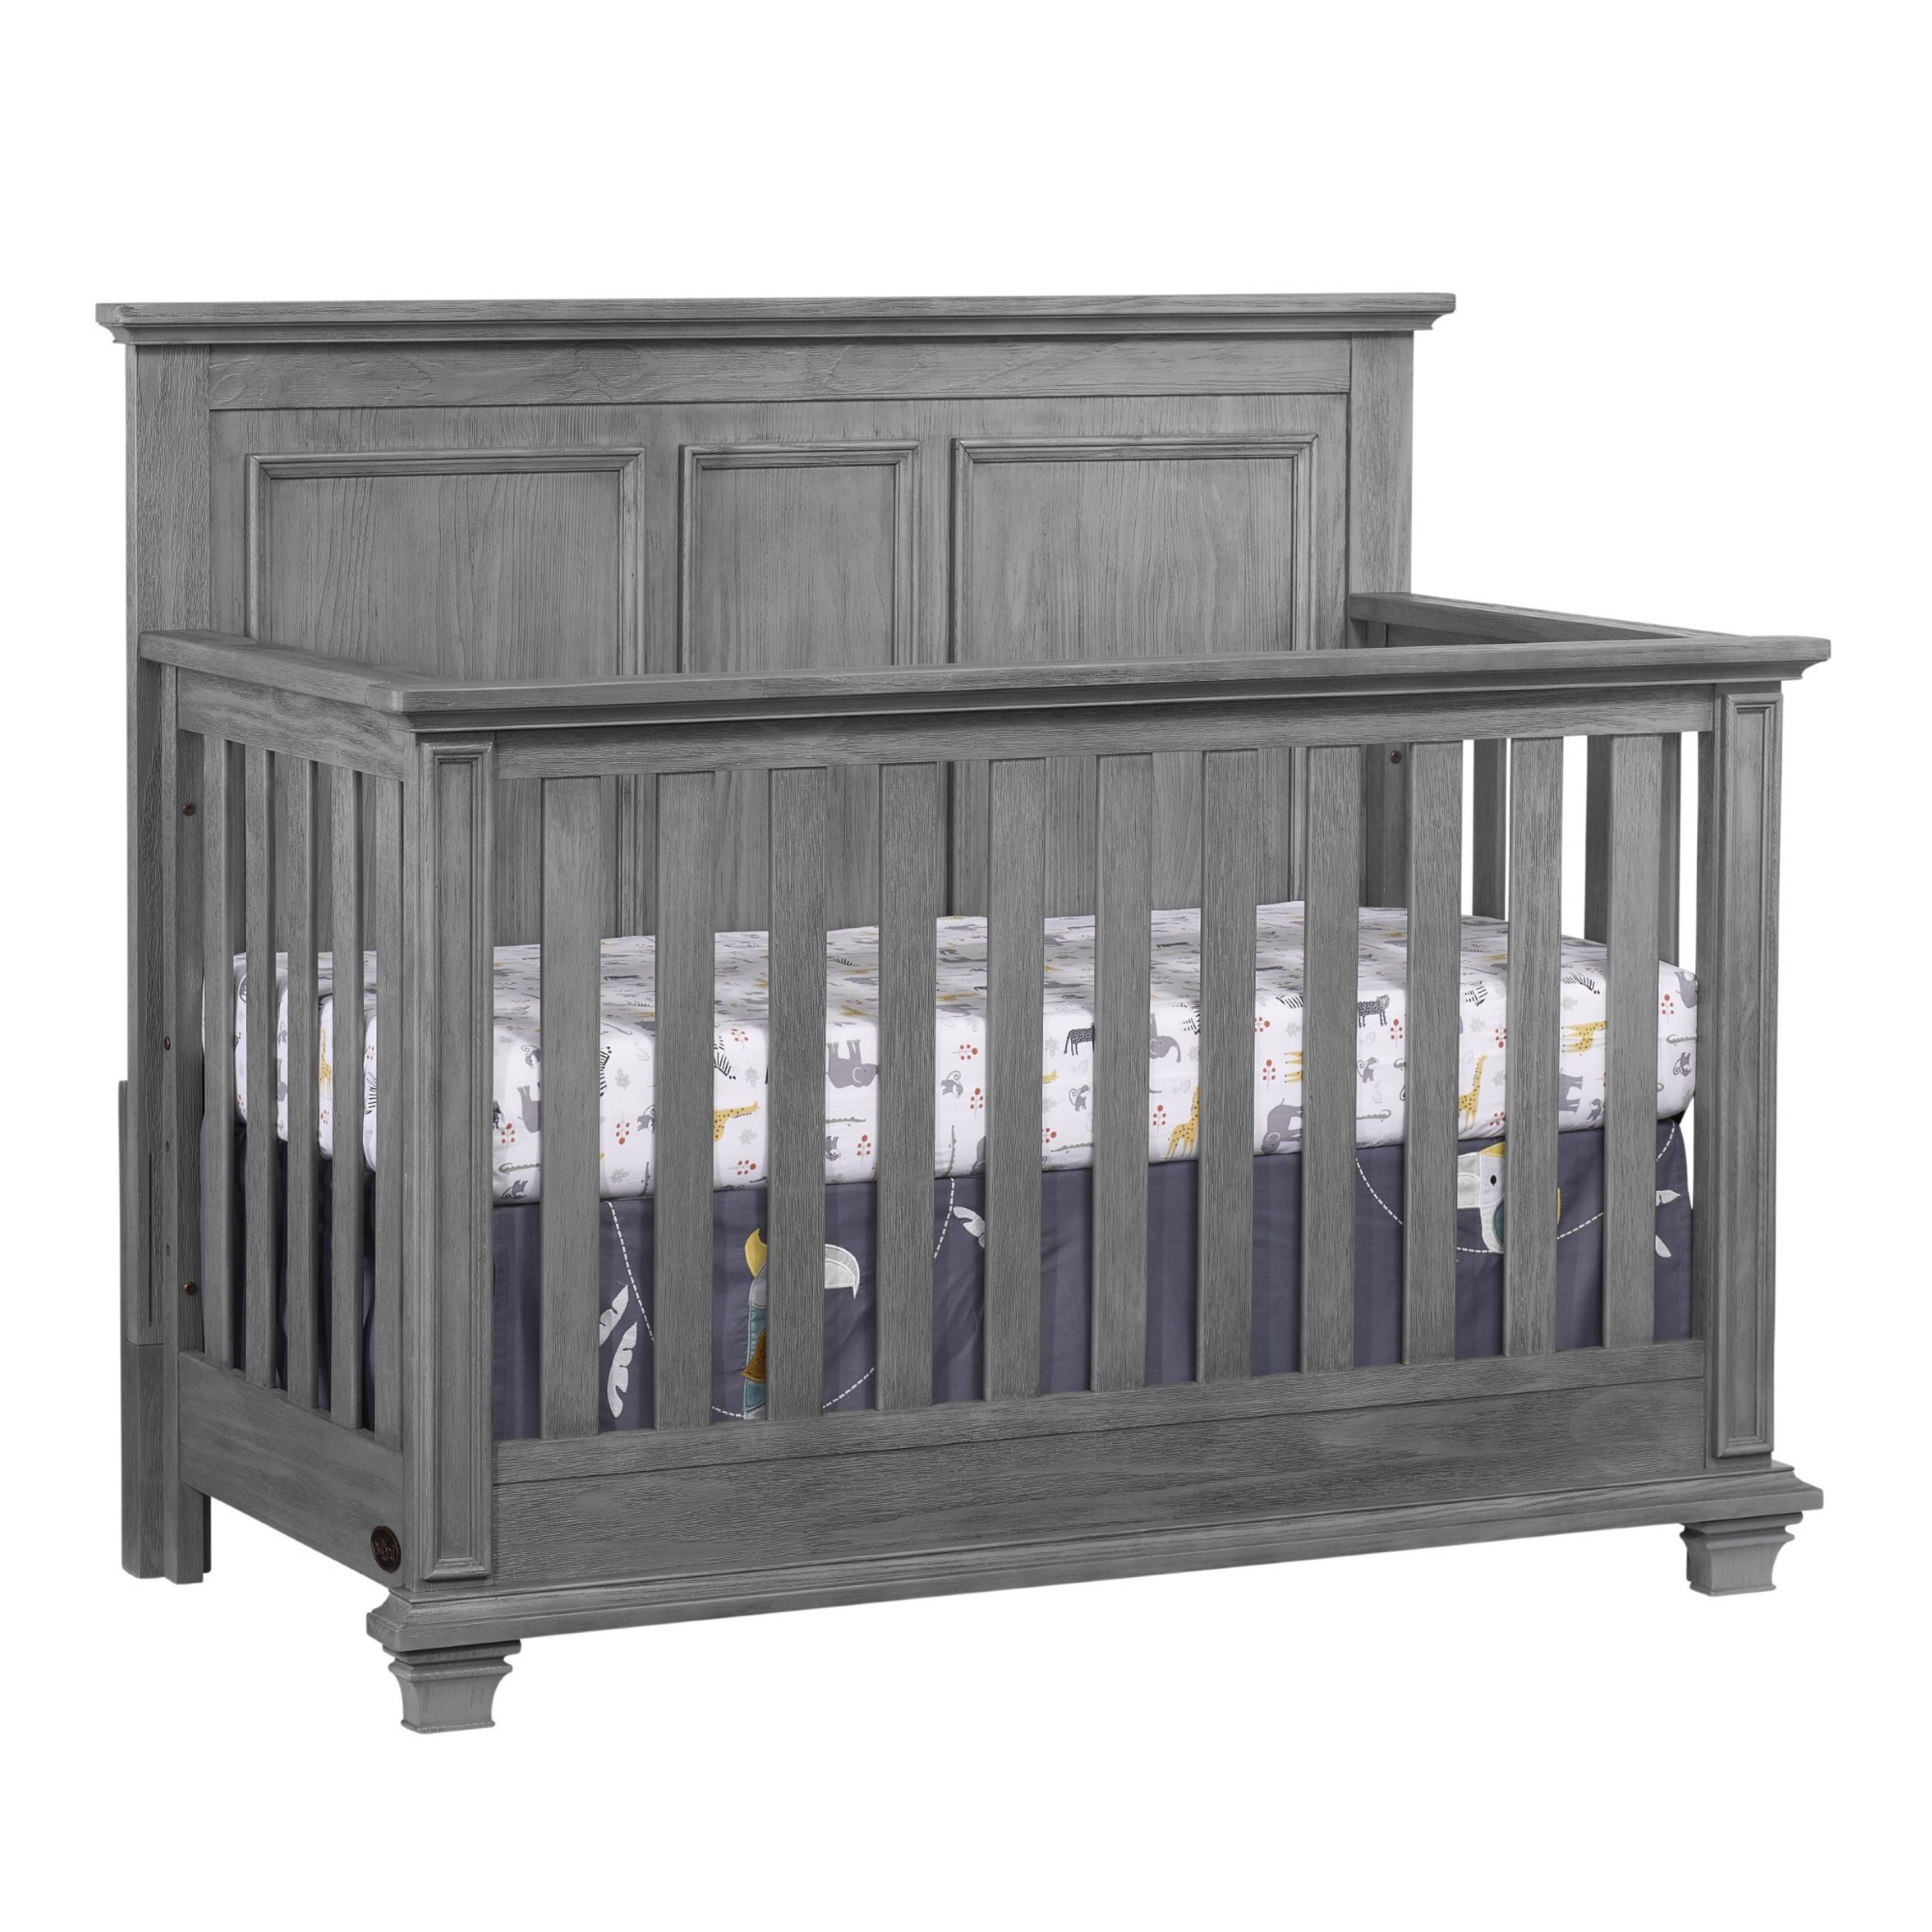 Oxford Baby Kenilworth 4-in-1 Convertible Crib, Graphite Gray, GREENGUARD Gold Certified, Wooden Crib - image 1 of 10